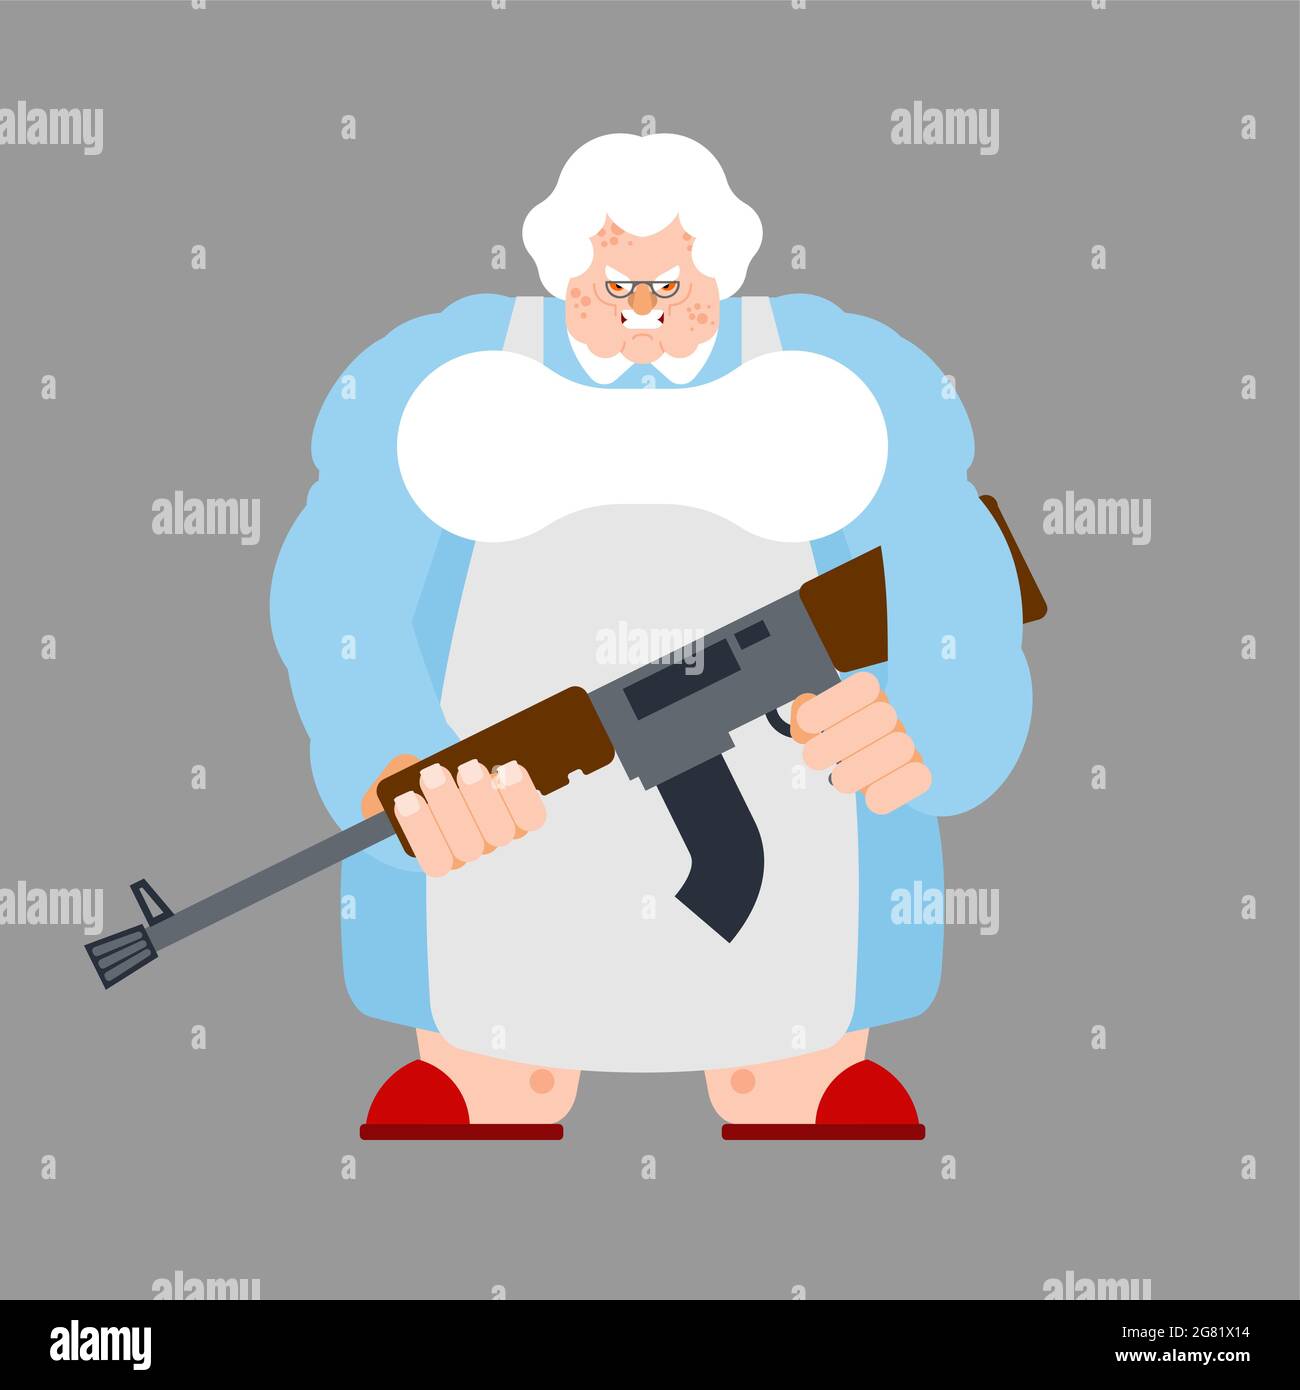 Grandma with gun. old woman with weapon. Stock Vector